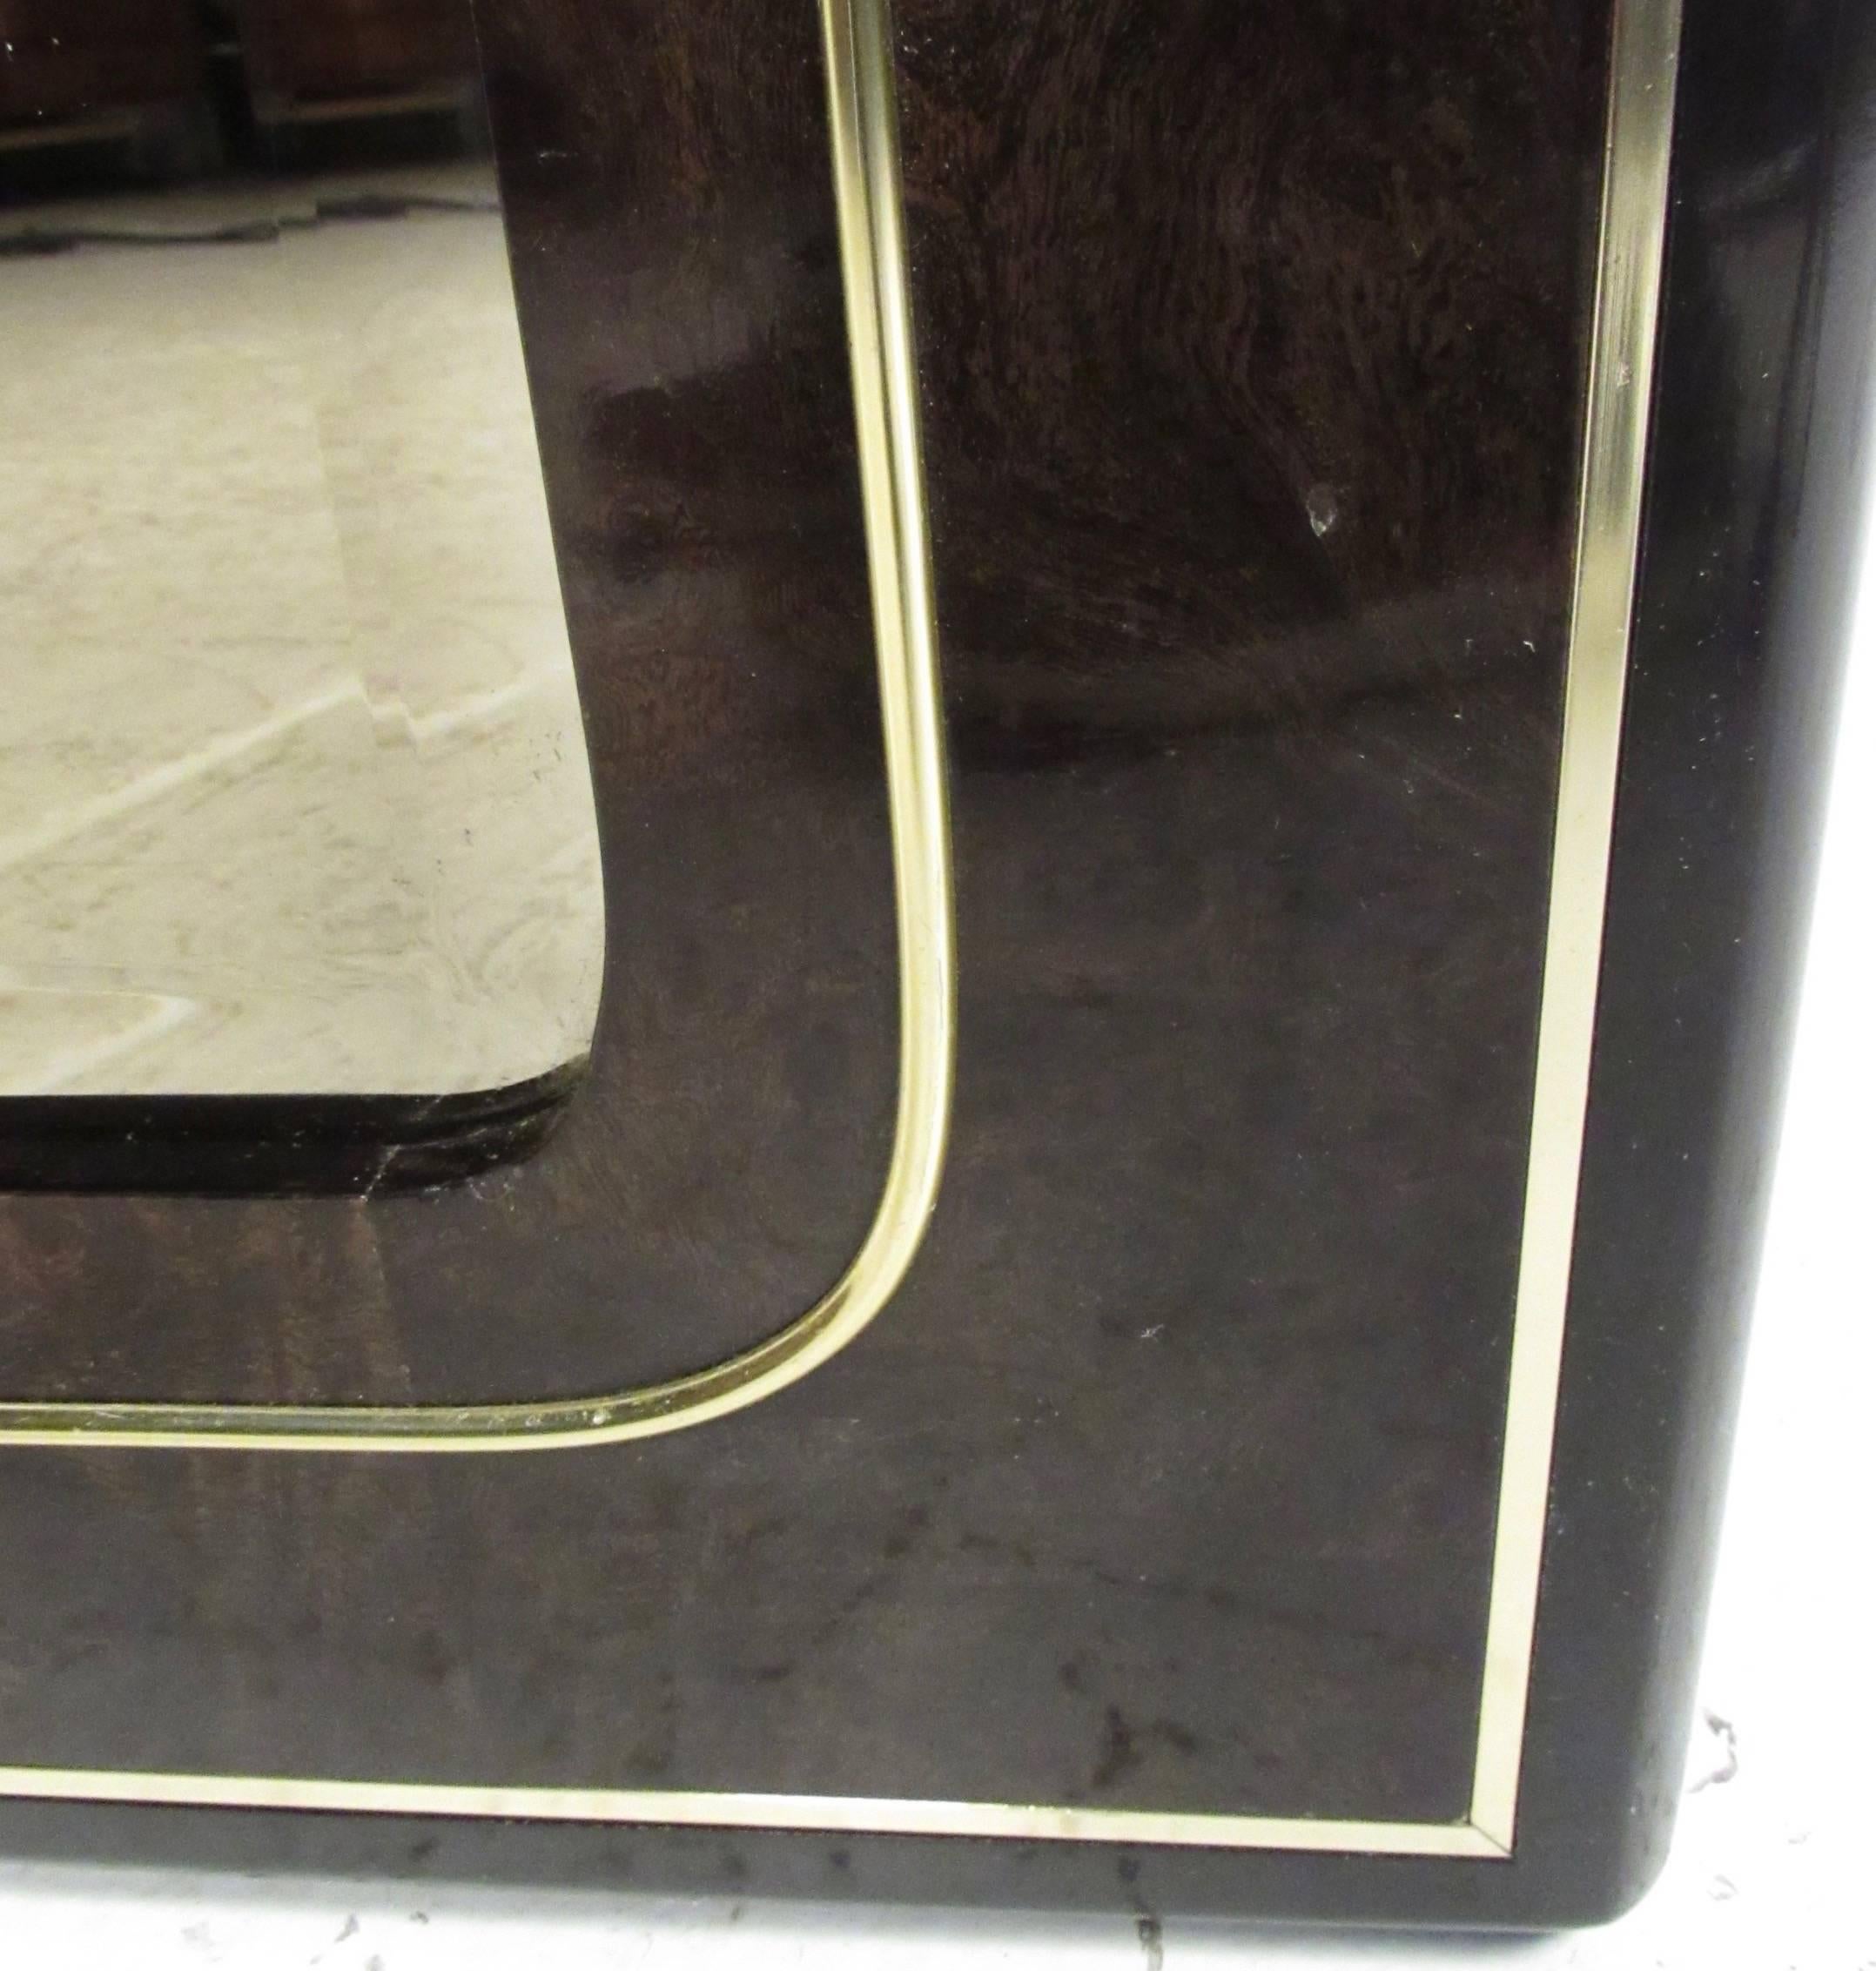 This unique lacquered burl wood mirror features brass trim, and acid-etched brass detail. This large Bernhard Rohne mirror makes this vintage modern midcentury mirror a stylish and impressive addition to any interior. Please confirm item location